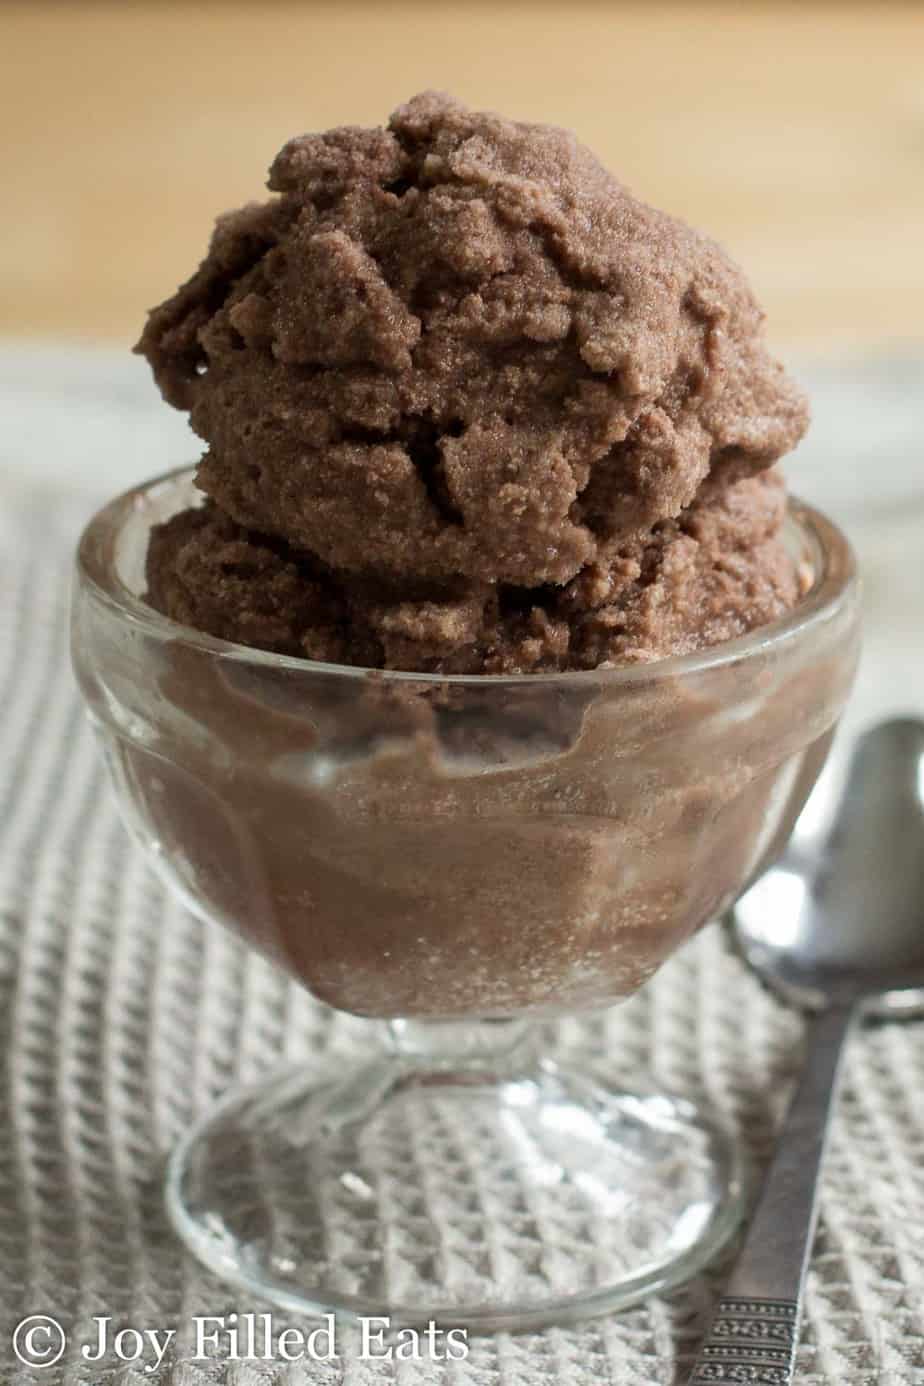 close up on chocolate cream Italian ice scoop in small glass bowl placed next to spoon